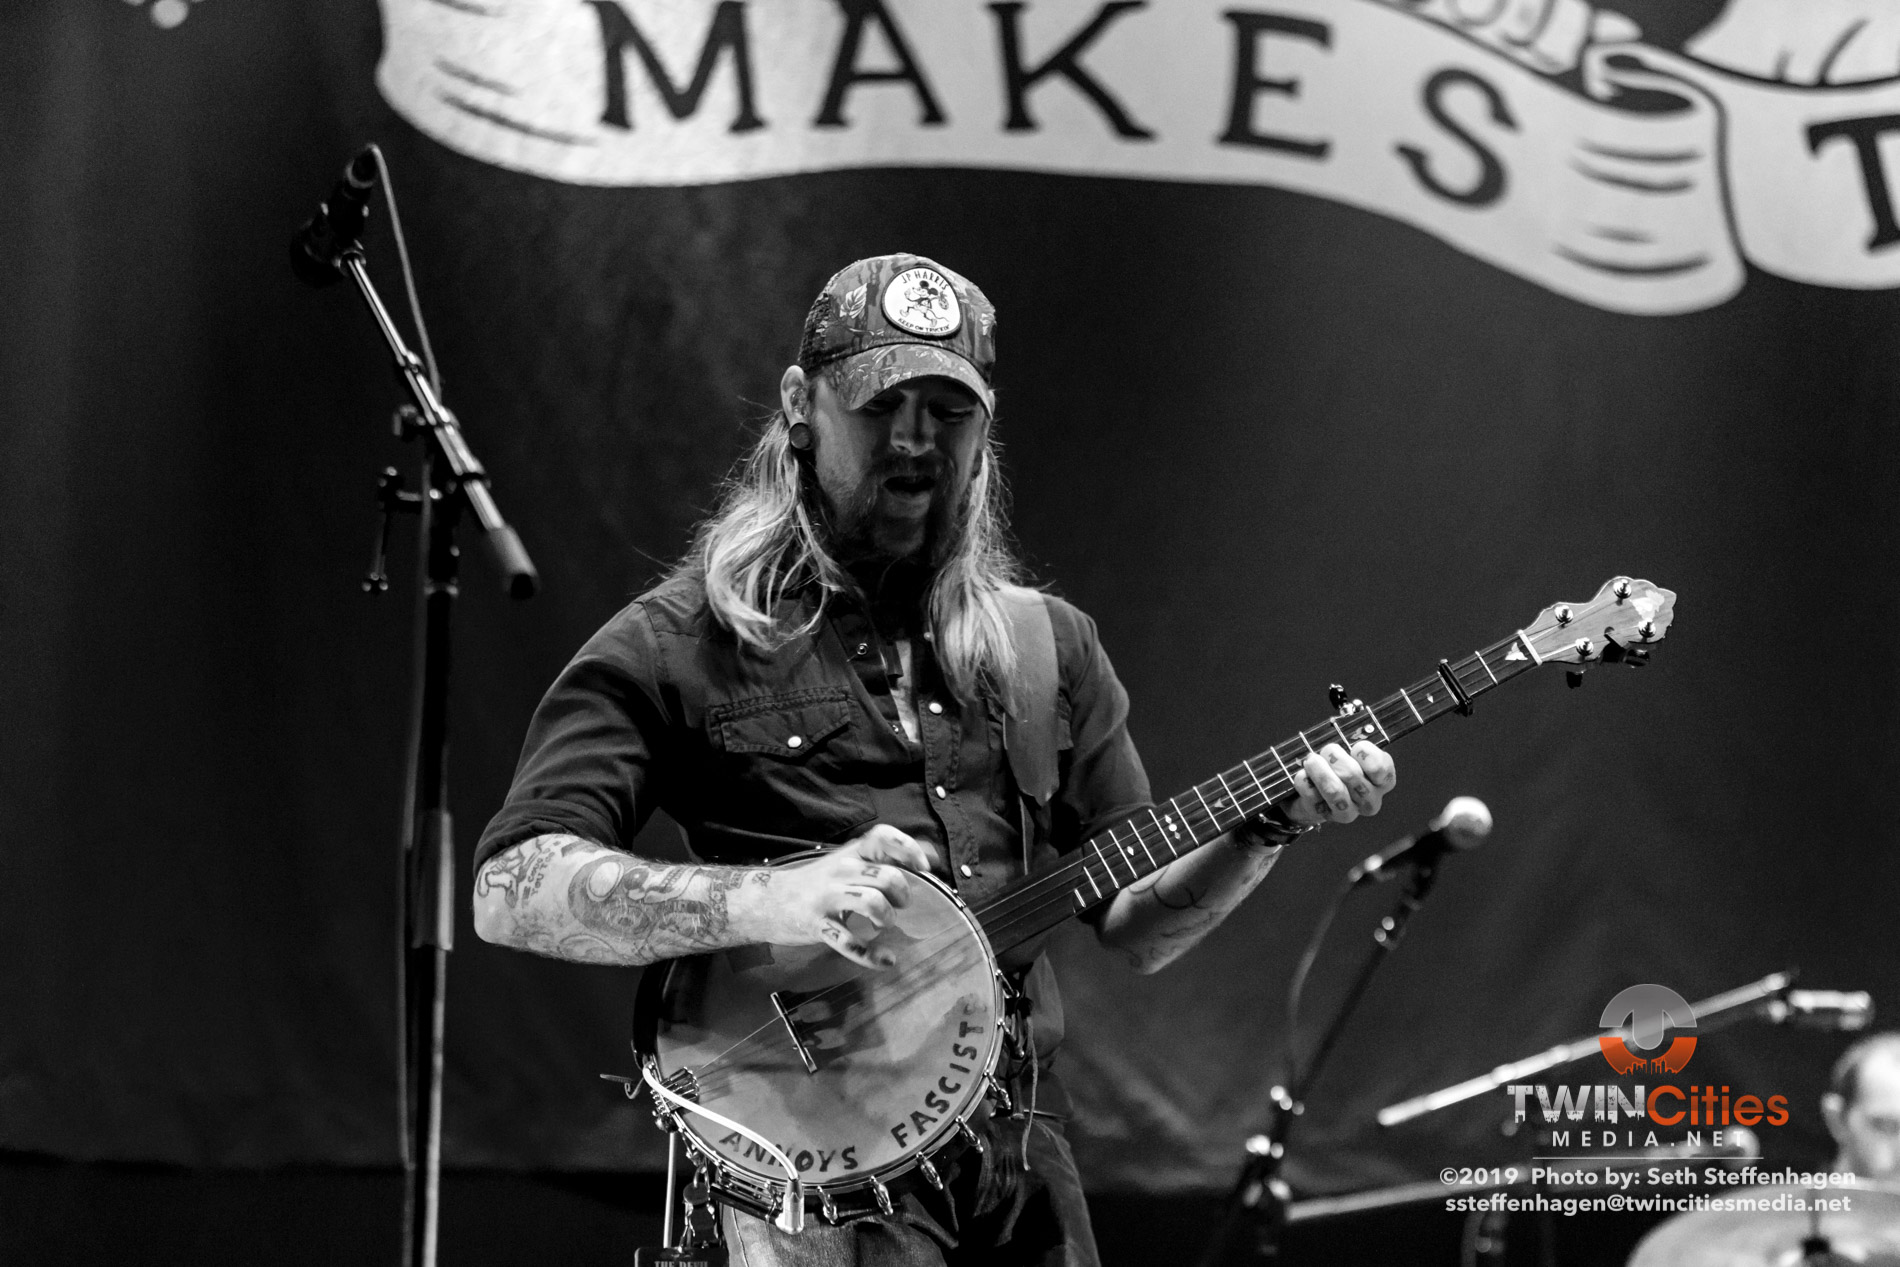 September 8, 2019 - Minneapolis, Minnesota, United States -  The Devil Makes Three live in concert at the The Armory opening for co-headliners Social Distortion and Flogging Molly.

(Photo by Seth Steffenhagen/Steffenhagen Photography)